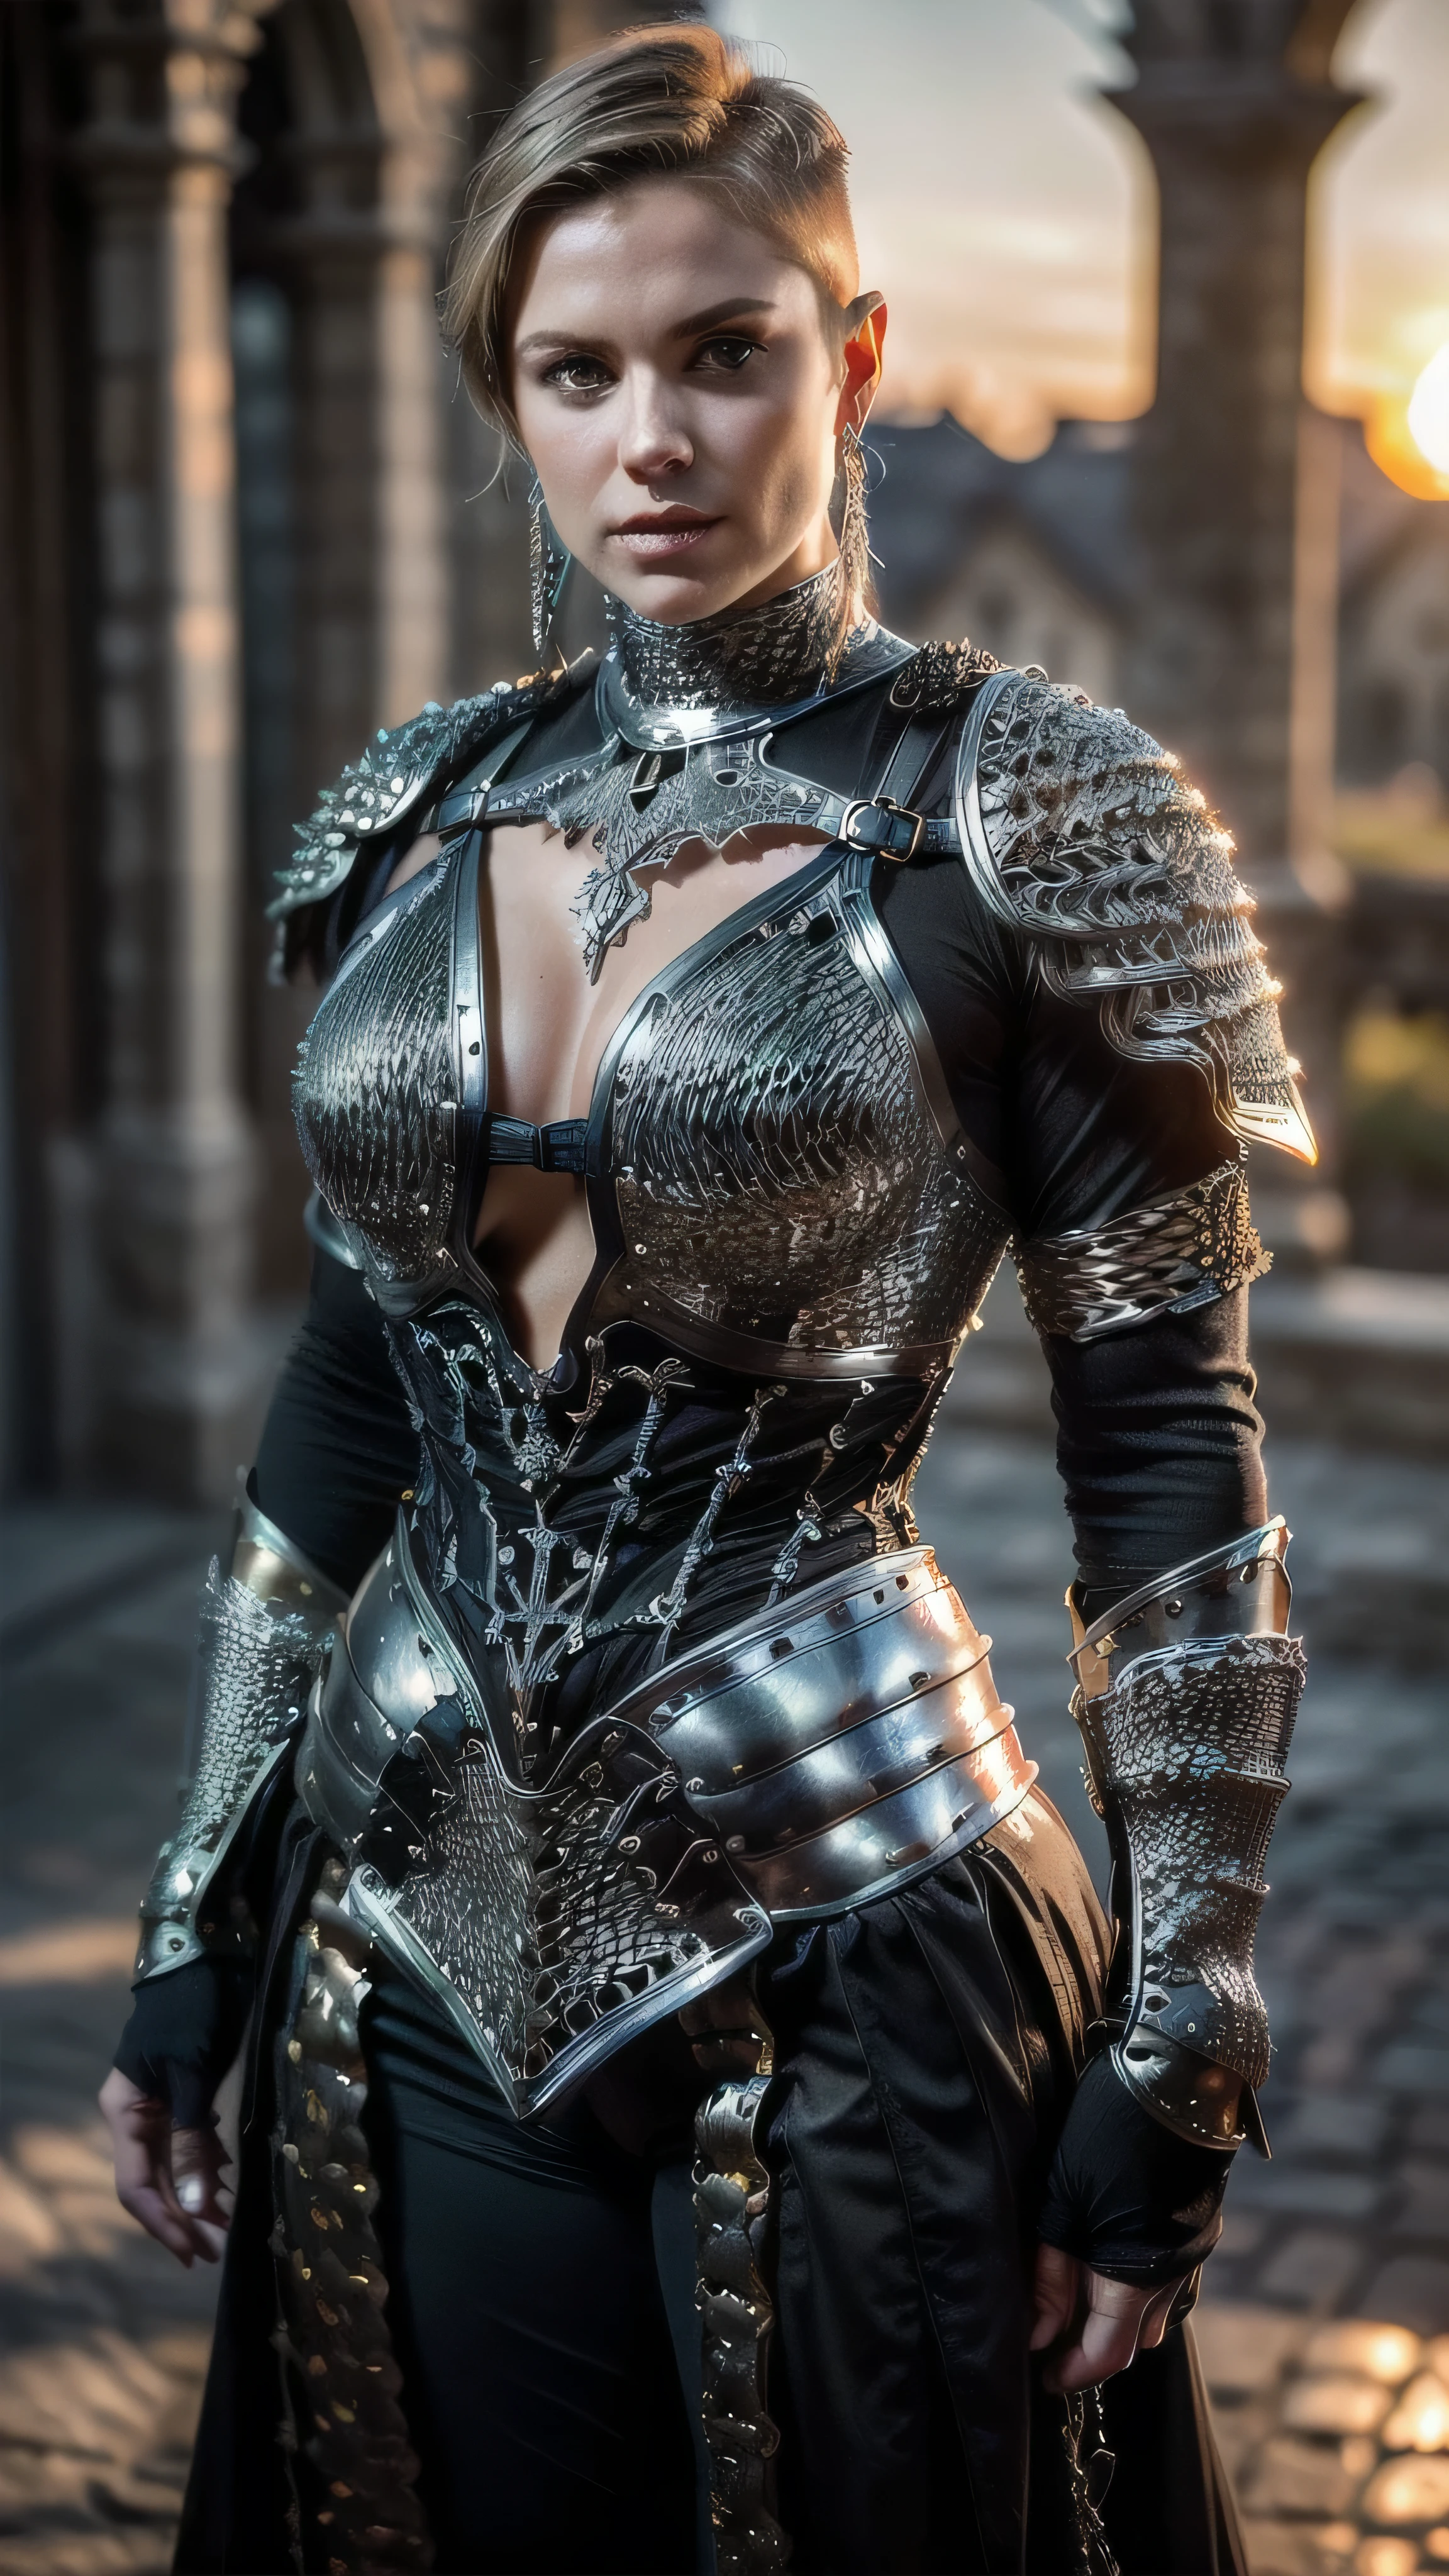 (masterpiece), (extremely intricate:1.3), (realistic), portrait of a muscular bodybuilder girl, ((((medieval armor:1.6 black gold filigree breastplate, perfectchainmail)), wind blown blowing [blonde hair:dark hair:0.6], [flat chest:large breasts:0.6], from below), tattoo:1.0), metal reflections, upper body, outdoors, intense sunlight, far away castle, professional photograph of a stunning woman detailed, (((short undercut shaved hair, dynamic pose))), sharp focus, dramatic, award winning, cinematic lighting, volumetrics dtx, (film grain, blurry background, blurry foreground, bokeh, depth of field, sunset, interaction, blackiron Perfectchainmail ribbons), 8K